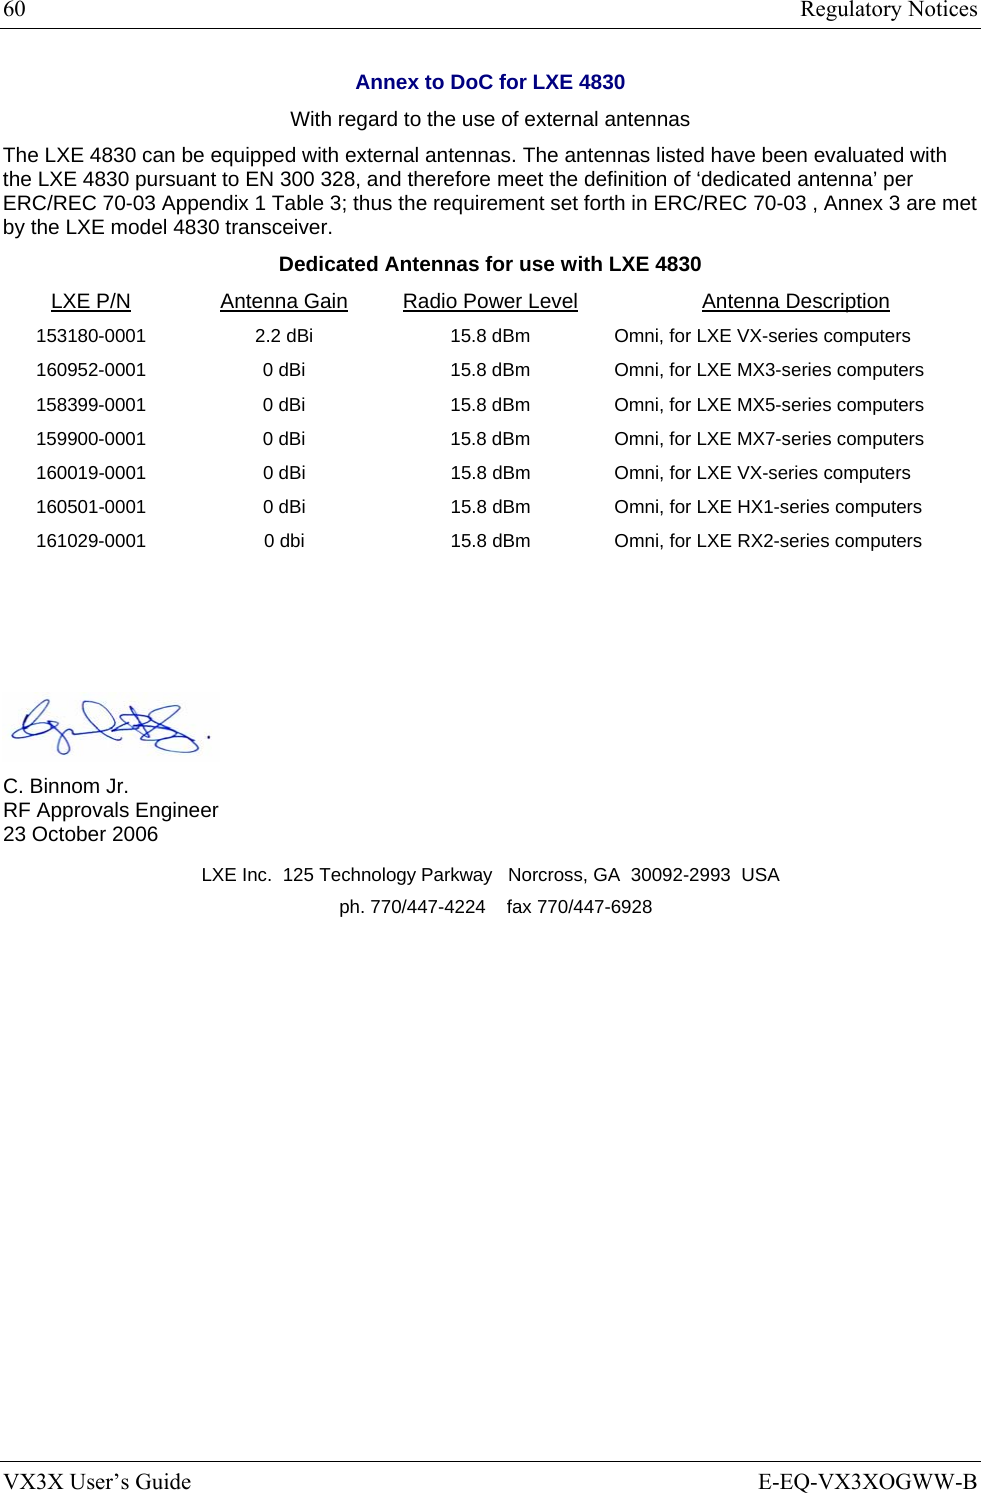 60  Regulatory Notices VX3X User’s Guide  E-EQ-VX3XOGWW-B Annex to DoC for LXE 4830 With regard to the use of external antennas The LXE 4830 can be equipped with external antennas. The antennas listed have been evaluated with the LXE 4830 pursuant to EN 300 328, and therefore meet the definition of ‘dedicated antenna’ per ERC/REC 70-03 Appendix 1 Table 3; thus the requirement set forth in ERC/REC 70-03 , Annex 3 are met by the LXE model 4830 transceiver. Dedicated Antennas for use with LXE 4830 LXE P/N Antenna Gain  Radio Power Level Antenna Description 153180-0001  2.2 dBi  15.8 dBm Omni, for LXE VX-series computers 160952-0001  0 dBi  15.8 dBm Omni, for LXE MX3-series computers 158399-0001  0 dBi  15.8 dBm Omni, for LXE MX5-series computers 159900-0001  0 dBi  15.8 dBm Omni, for LXE MX7-series computers 160019-0001  0 dBi  15.8 dBm  Omni, for LXE VX-series computers 160501-0001  0 dBi  15.8 dBm  Omni, for LXE HX1-series computers 161029-0001  0 dbi  15.8 dBm  Omni, for LXE RX2-series computers      C. Binnom Jr. RF Approvals Engineer 23 October 2006 LXE Inc.  125 Technology Parkway   Norcross, GA  30092-2993  USA   ph. 770/447-4224    fax 770/447-6928      